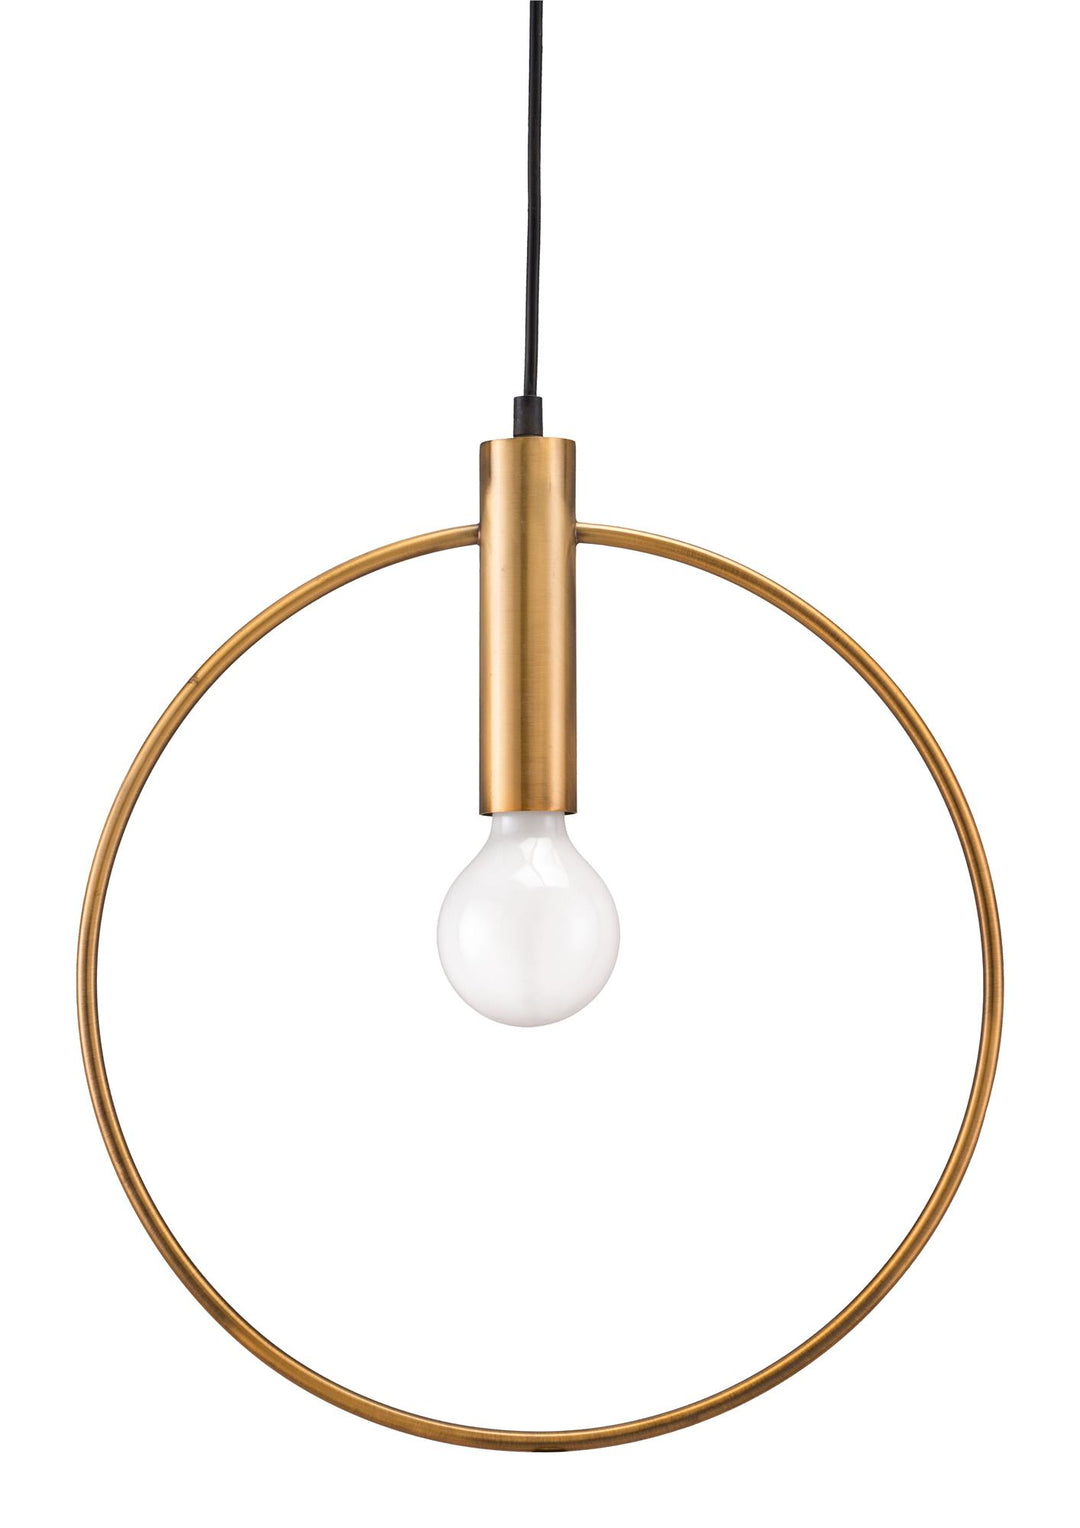 Stylish Ceiling Lamp with round gold plated steel frame - Brass